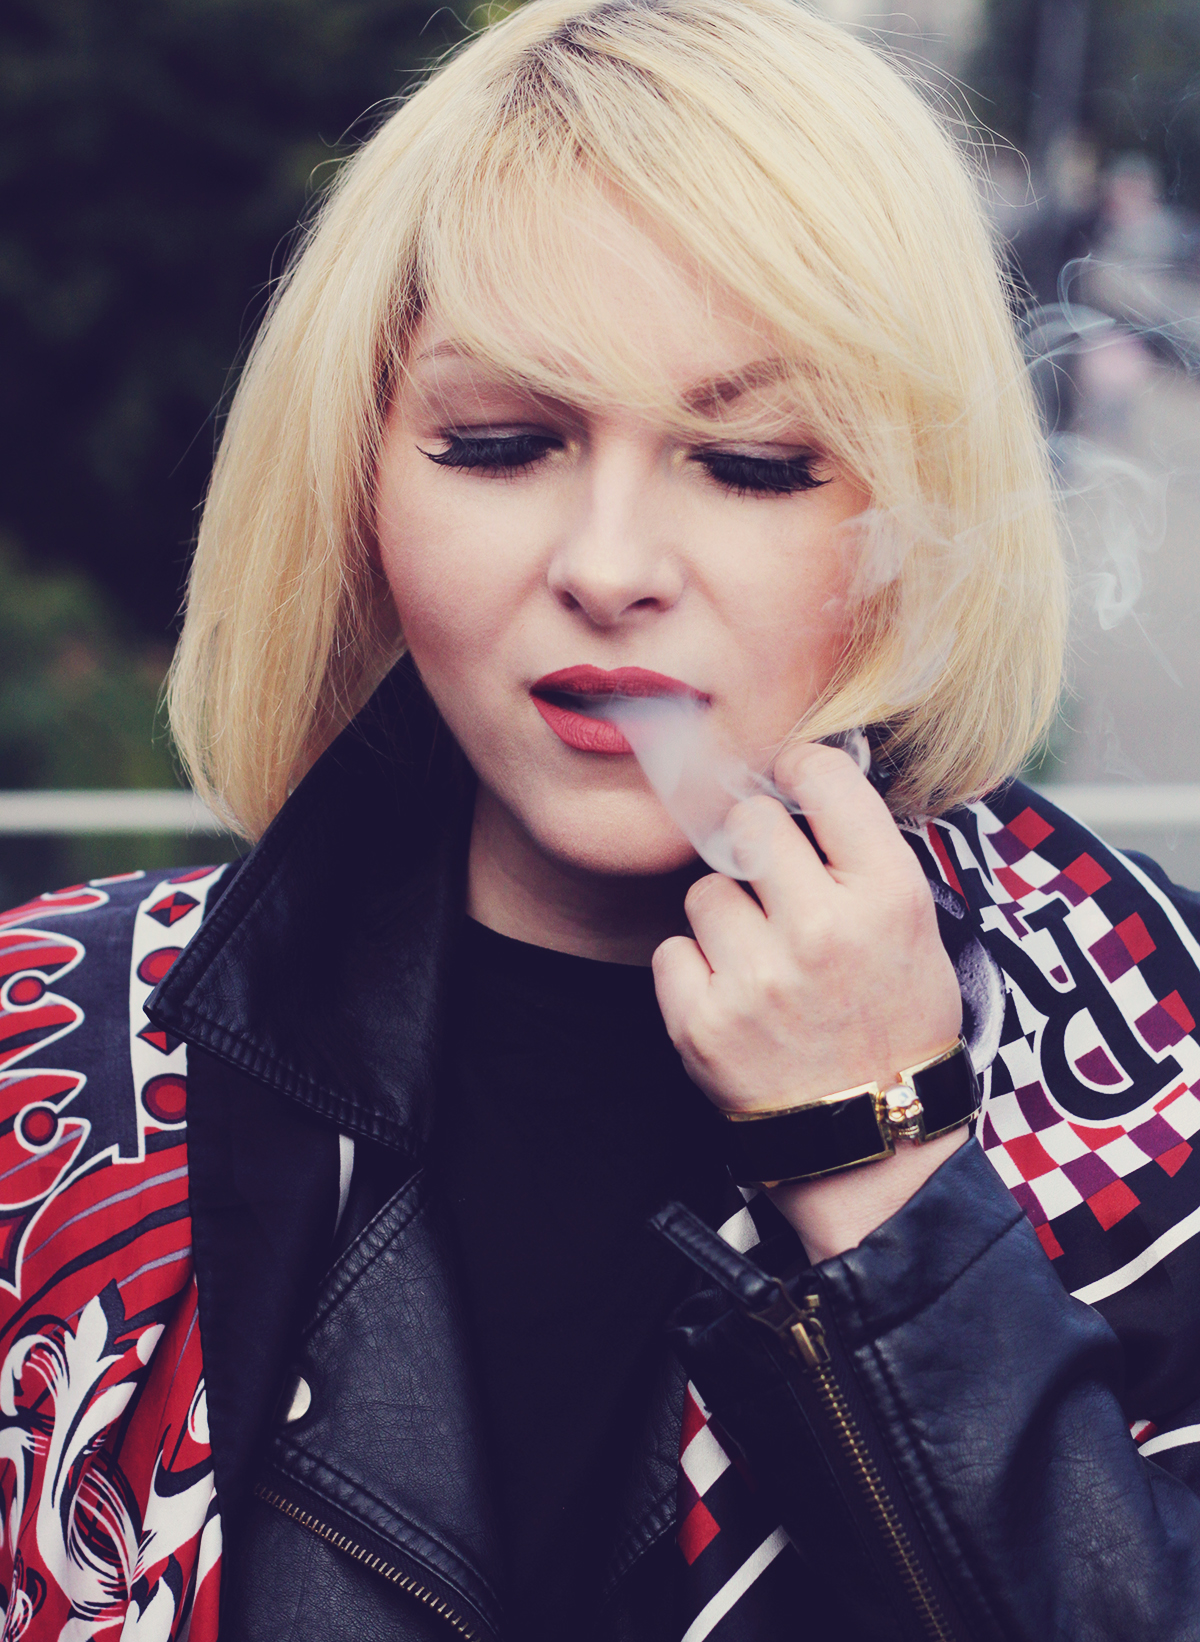 rock chic look, rock'n'roll, edgy look, Jean Paul Gaultier scarf, smoking, black leather jacket, Alexander McQueen bracelet, smoke coming out of mouth, make-up